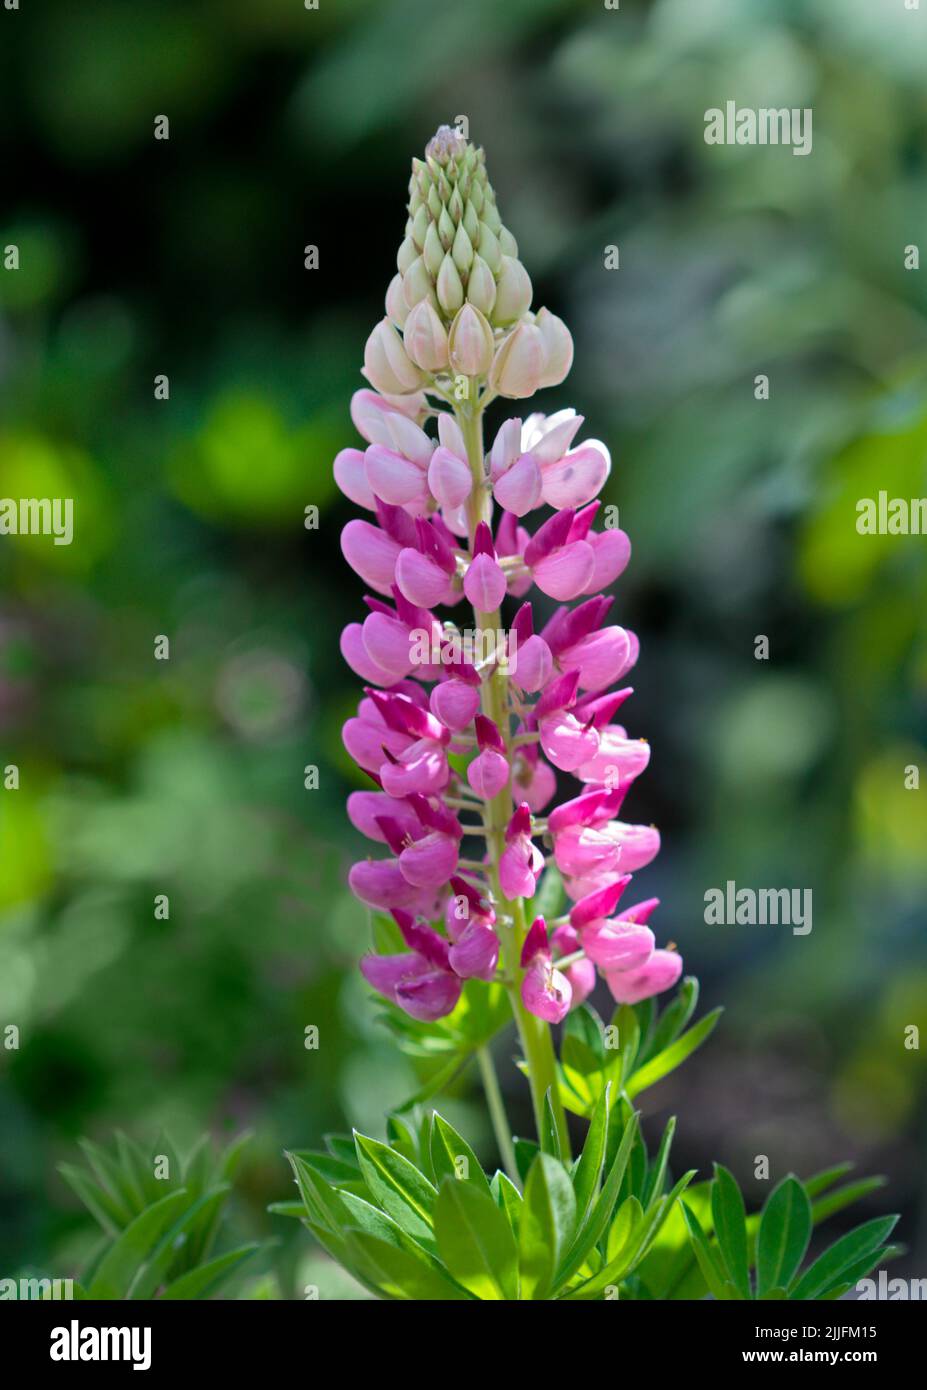 Lupins roses Banque D'Images